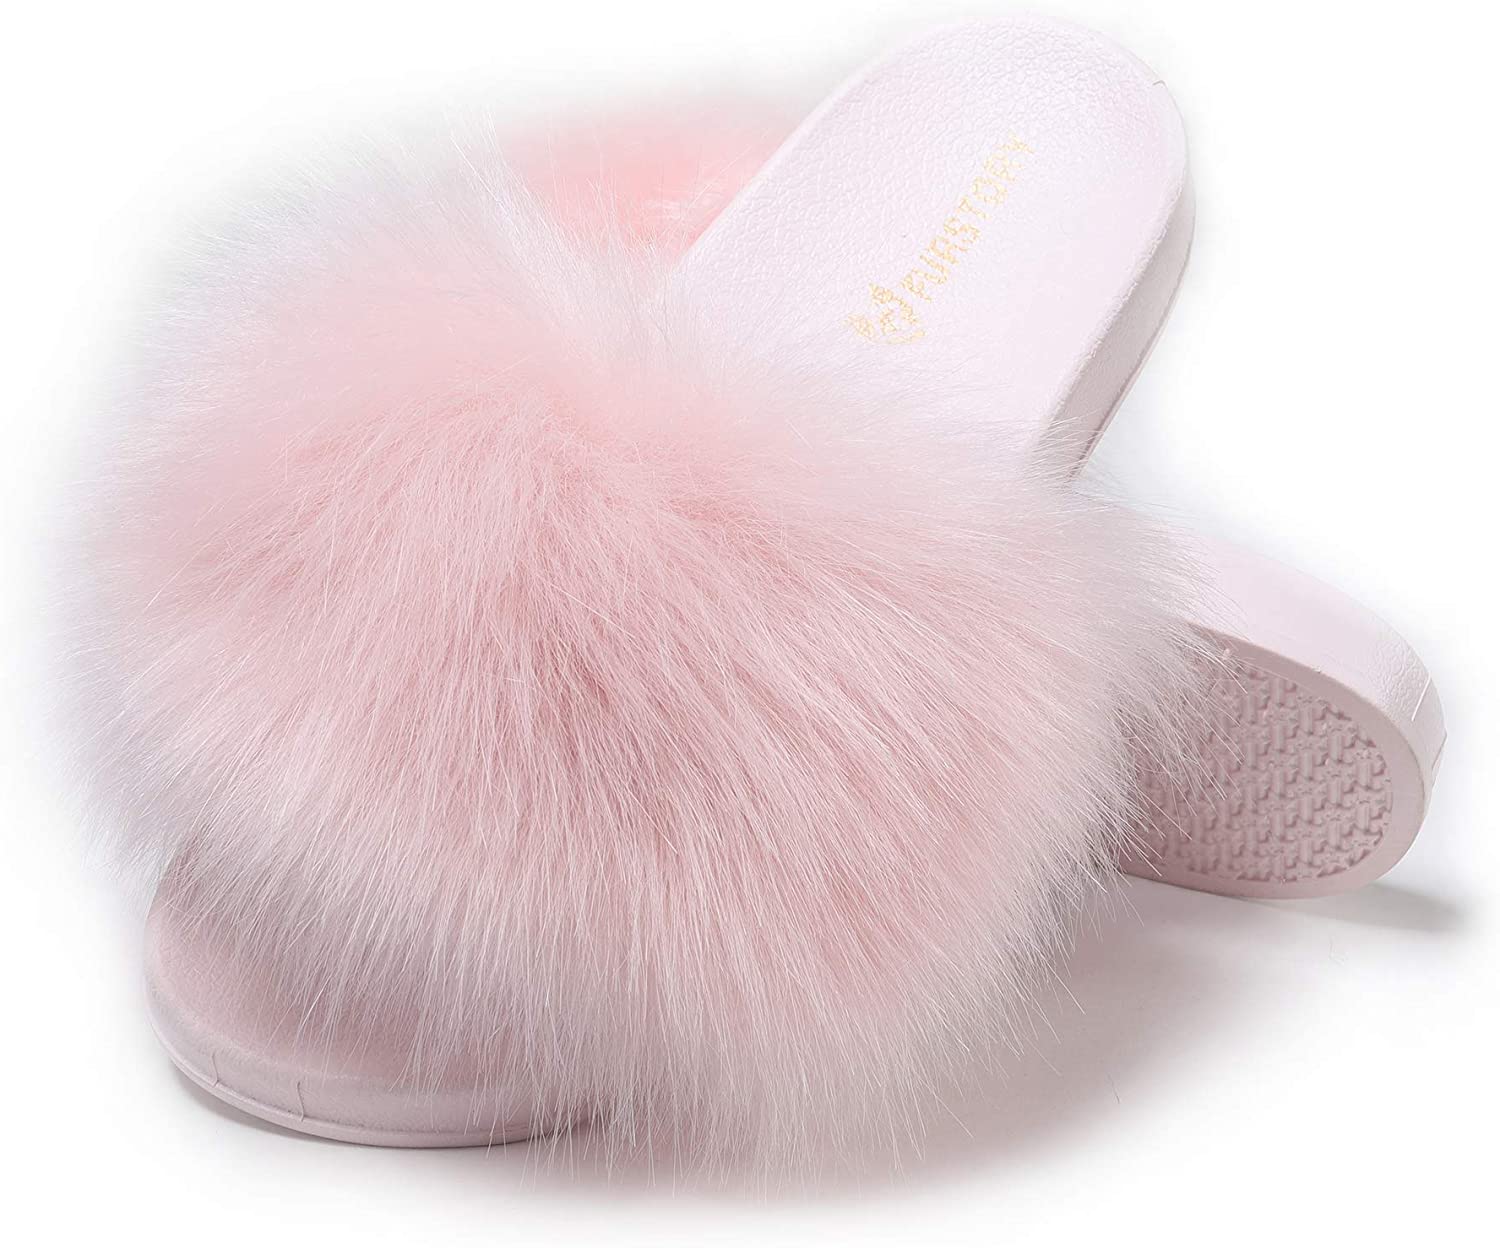 Tradecan Women's Furry Slides Faux Fur Slides Fuzzy Slippers Fluffy Sandals Outdoor Indoor, Size: 37, Pink